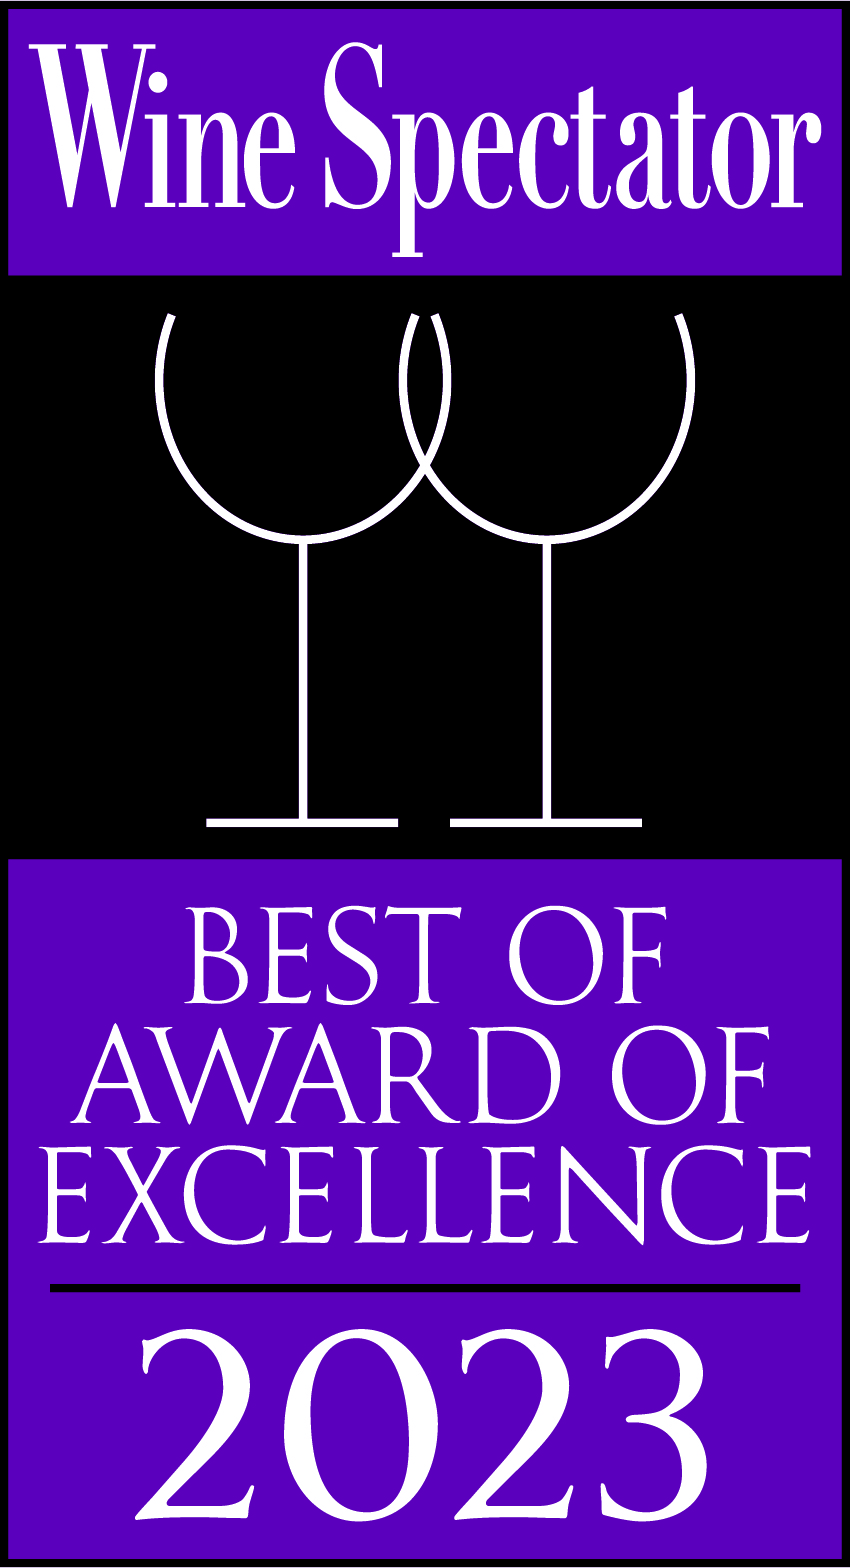 Wine Spectator Best of Award of Excellence 2023